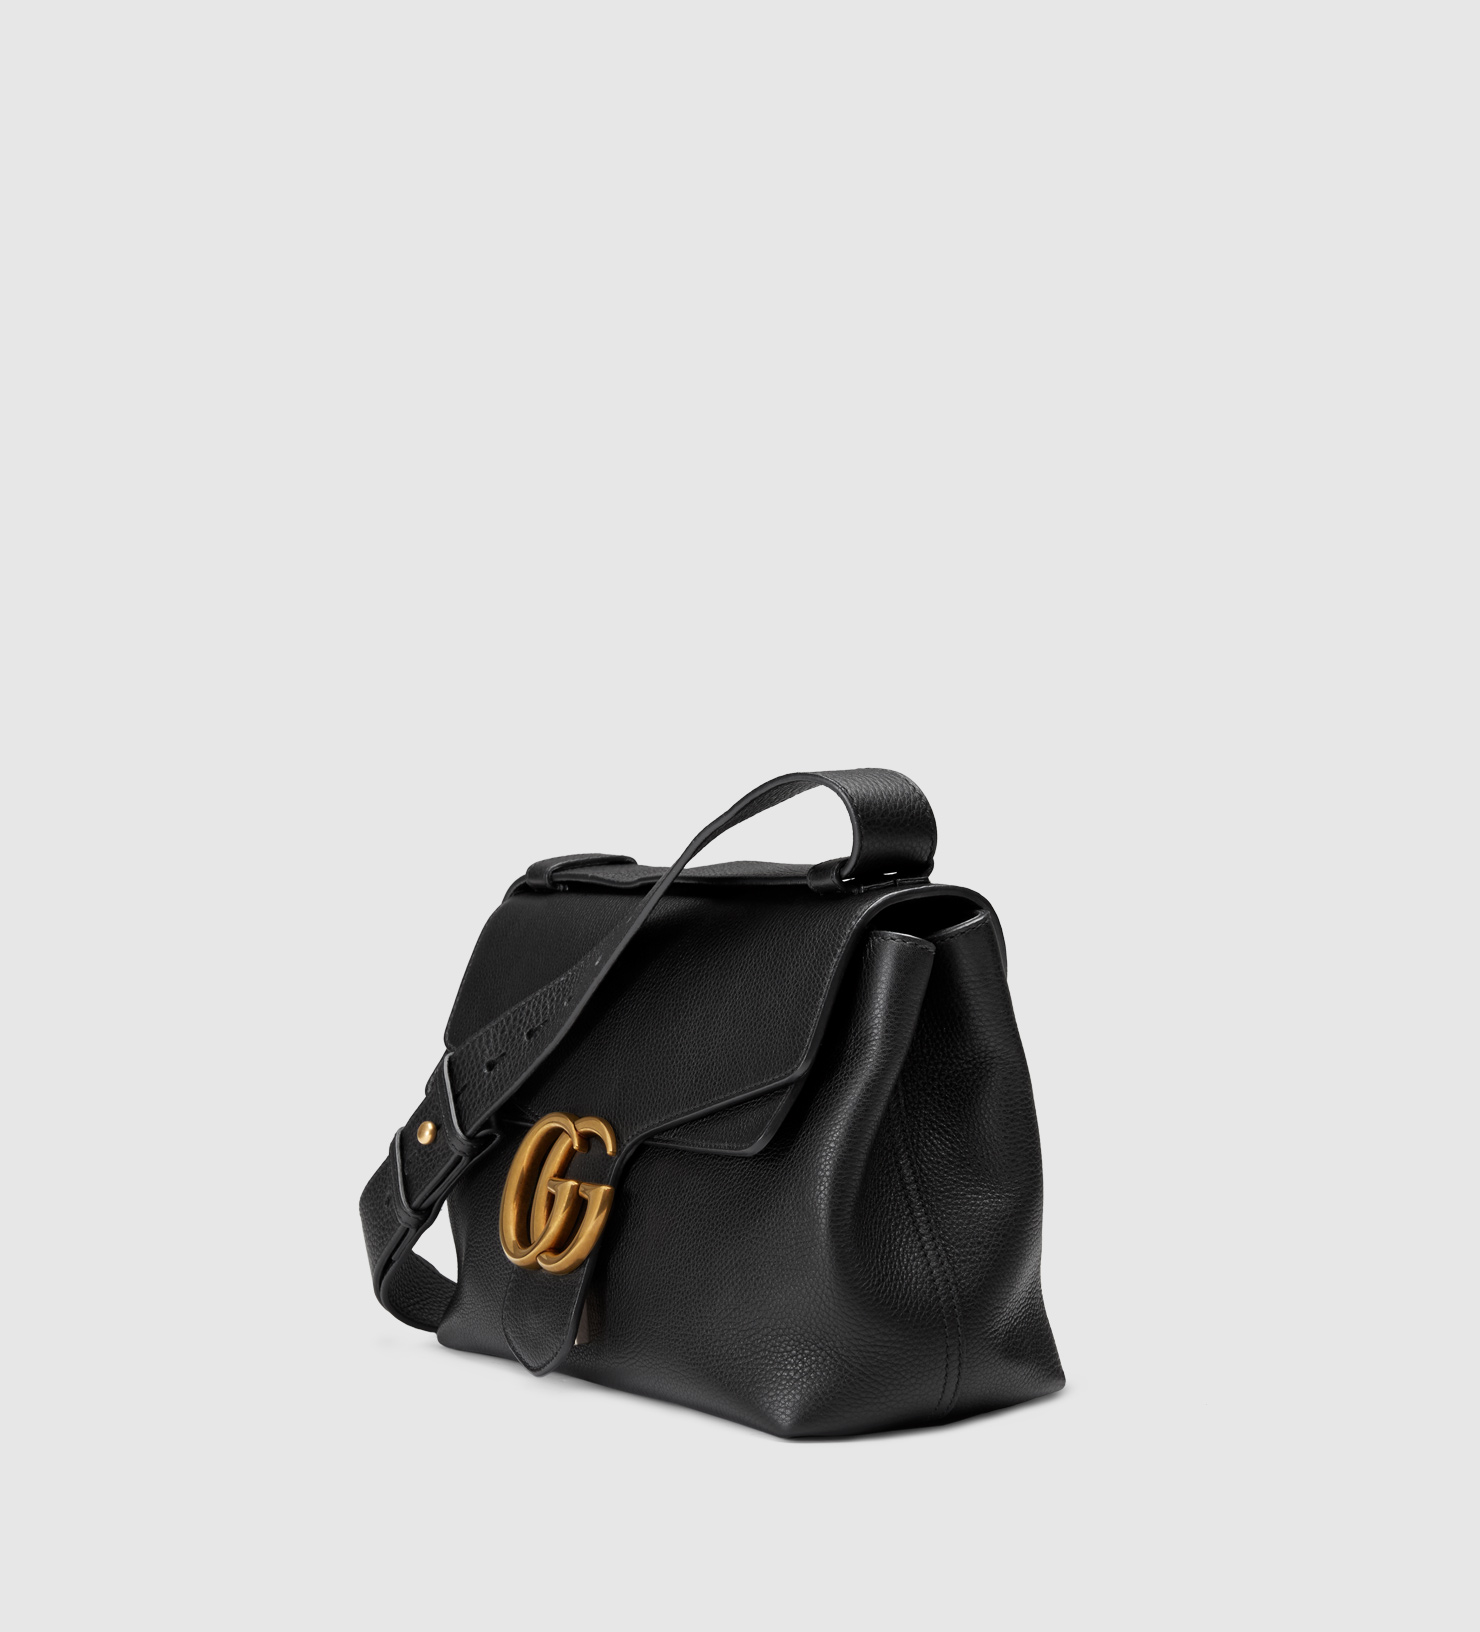 Gucci Gg Marmont Leather Shoulder Bag in Black - Lyst